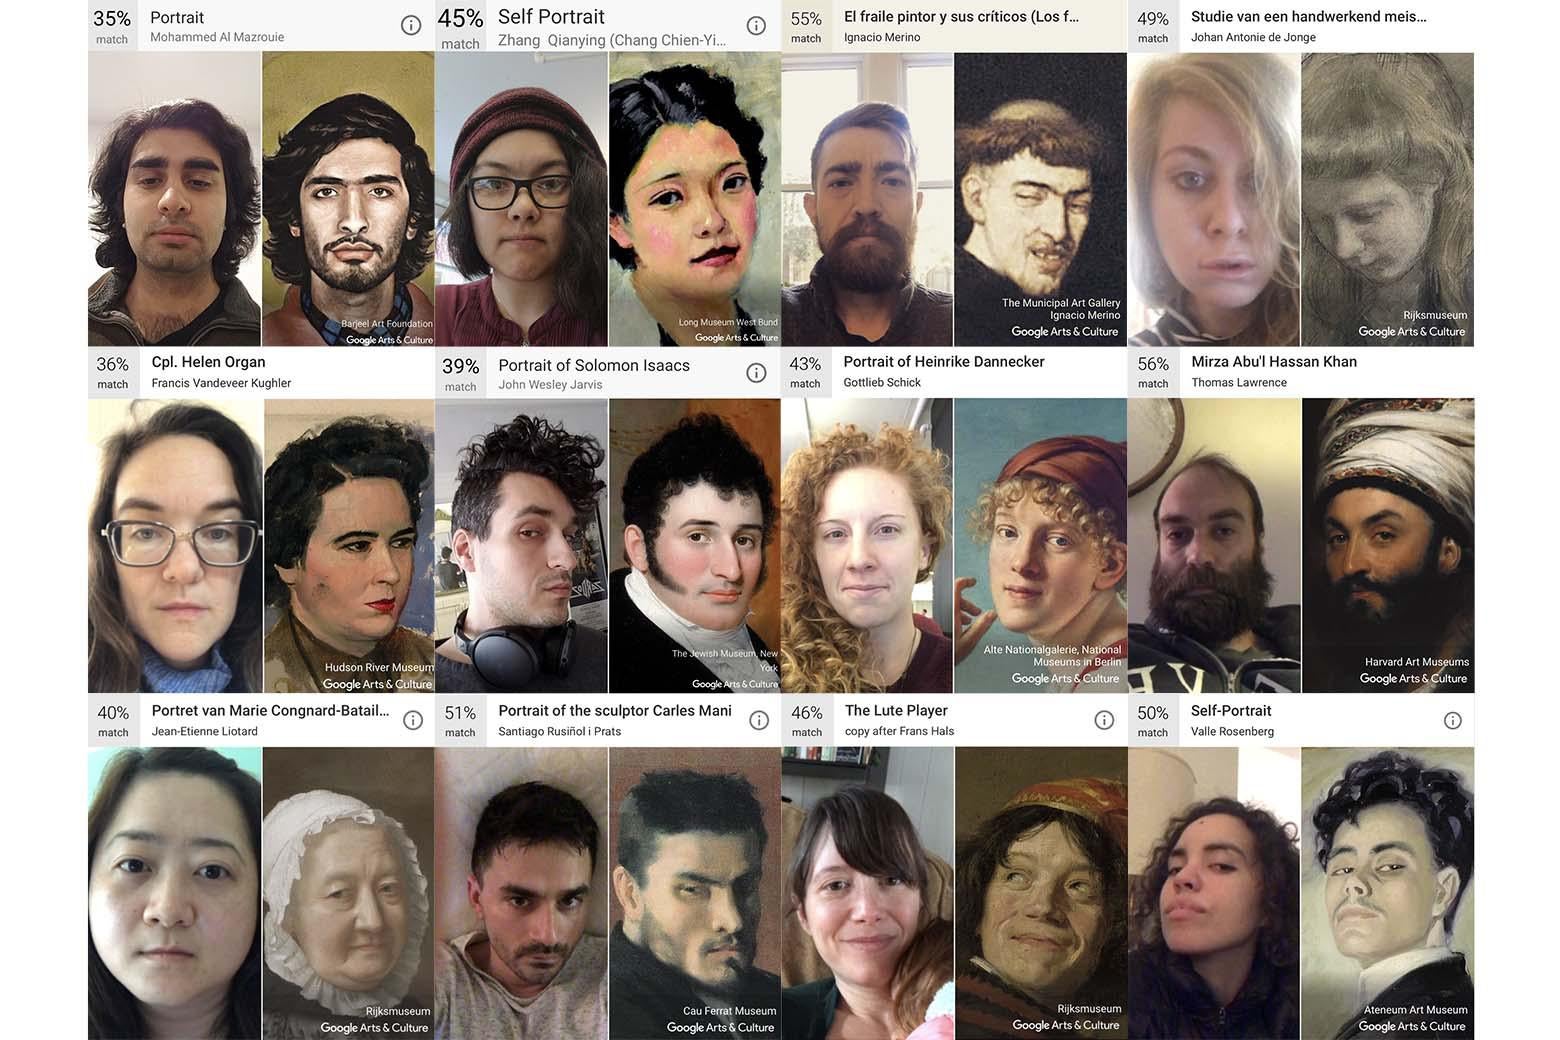 Slate staff results from the Google Arts & Culture App.